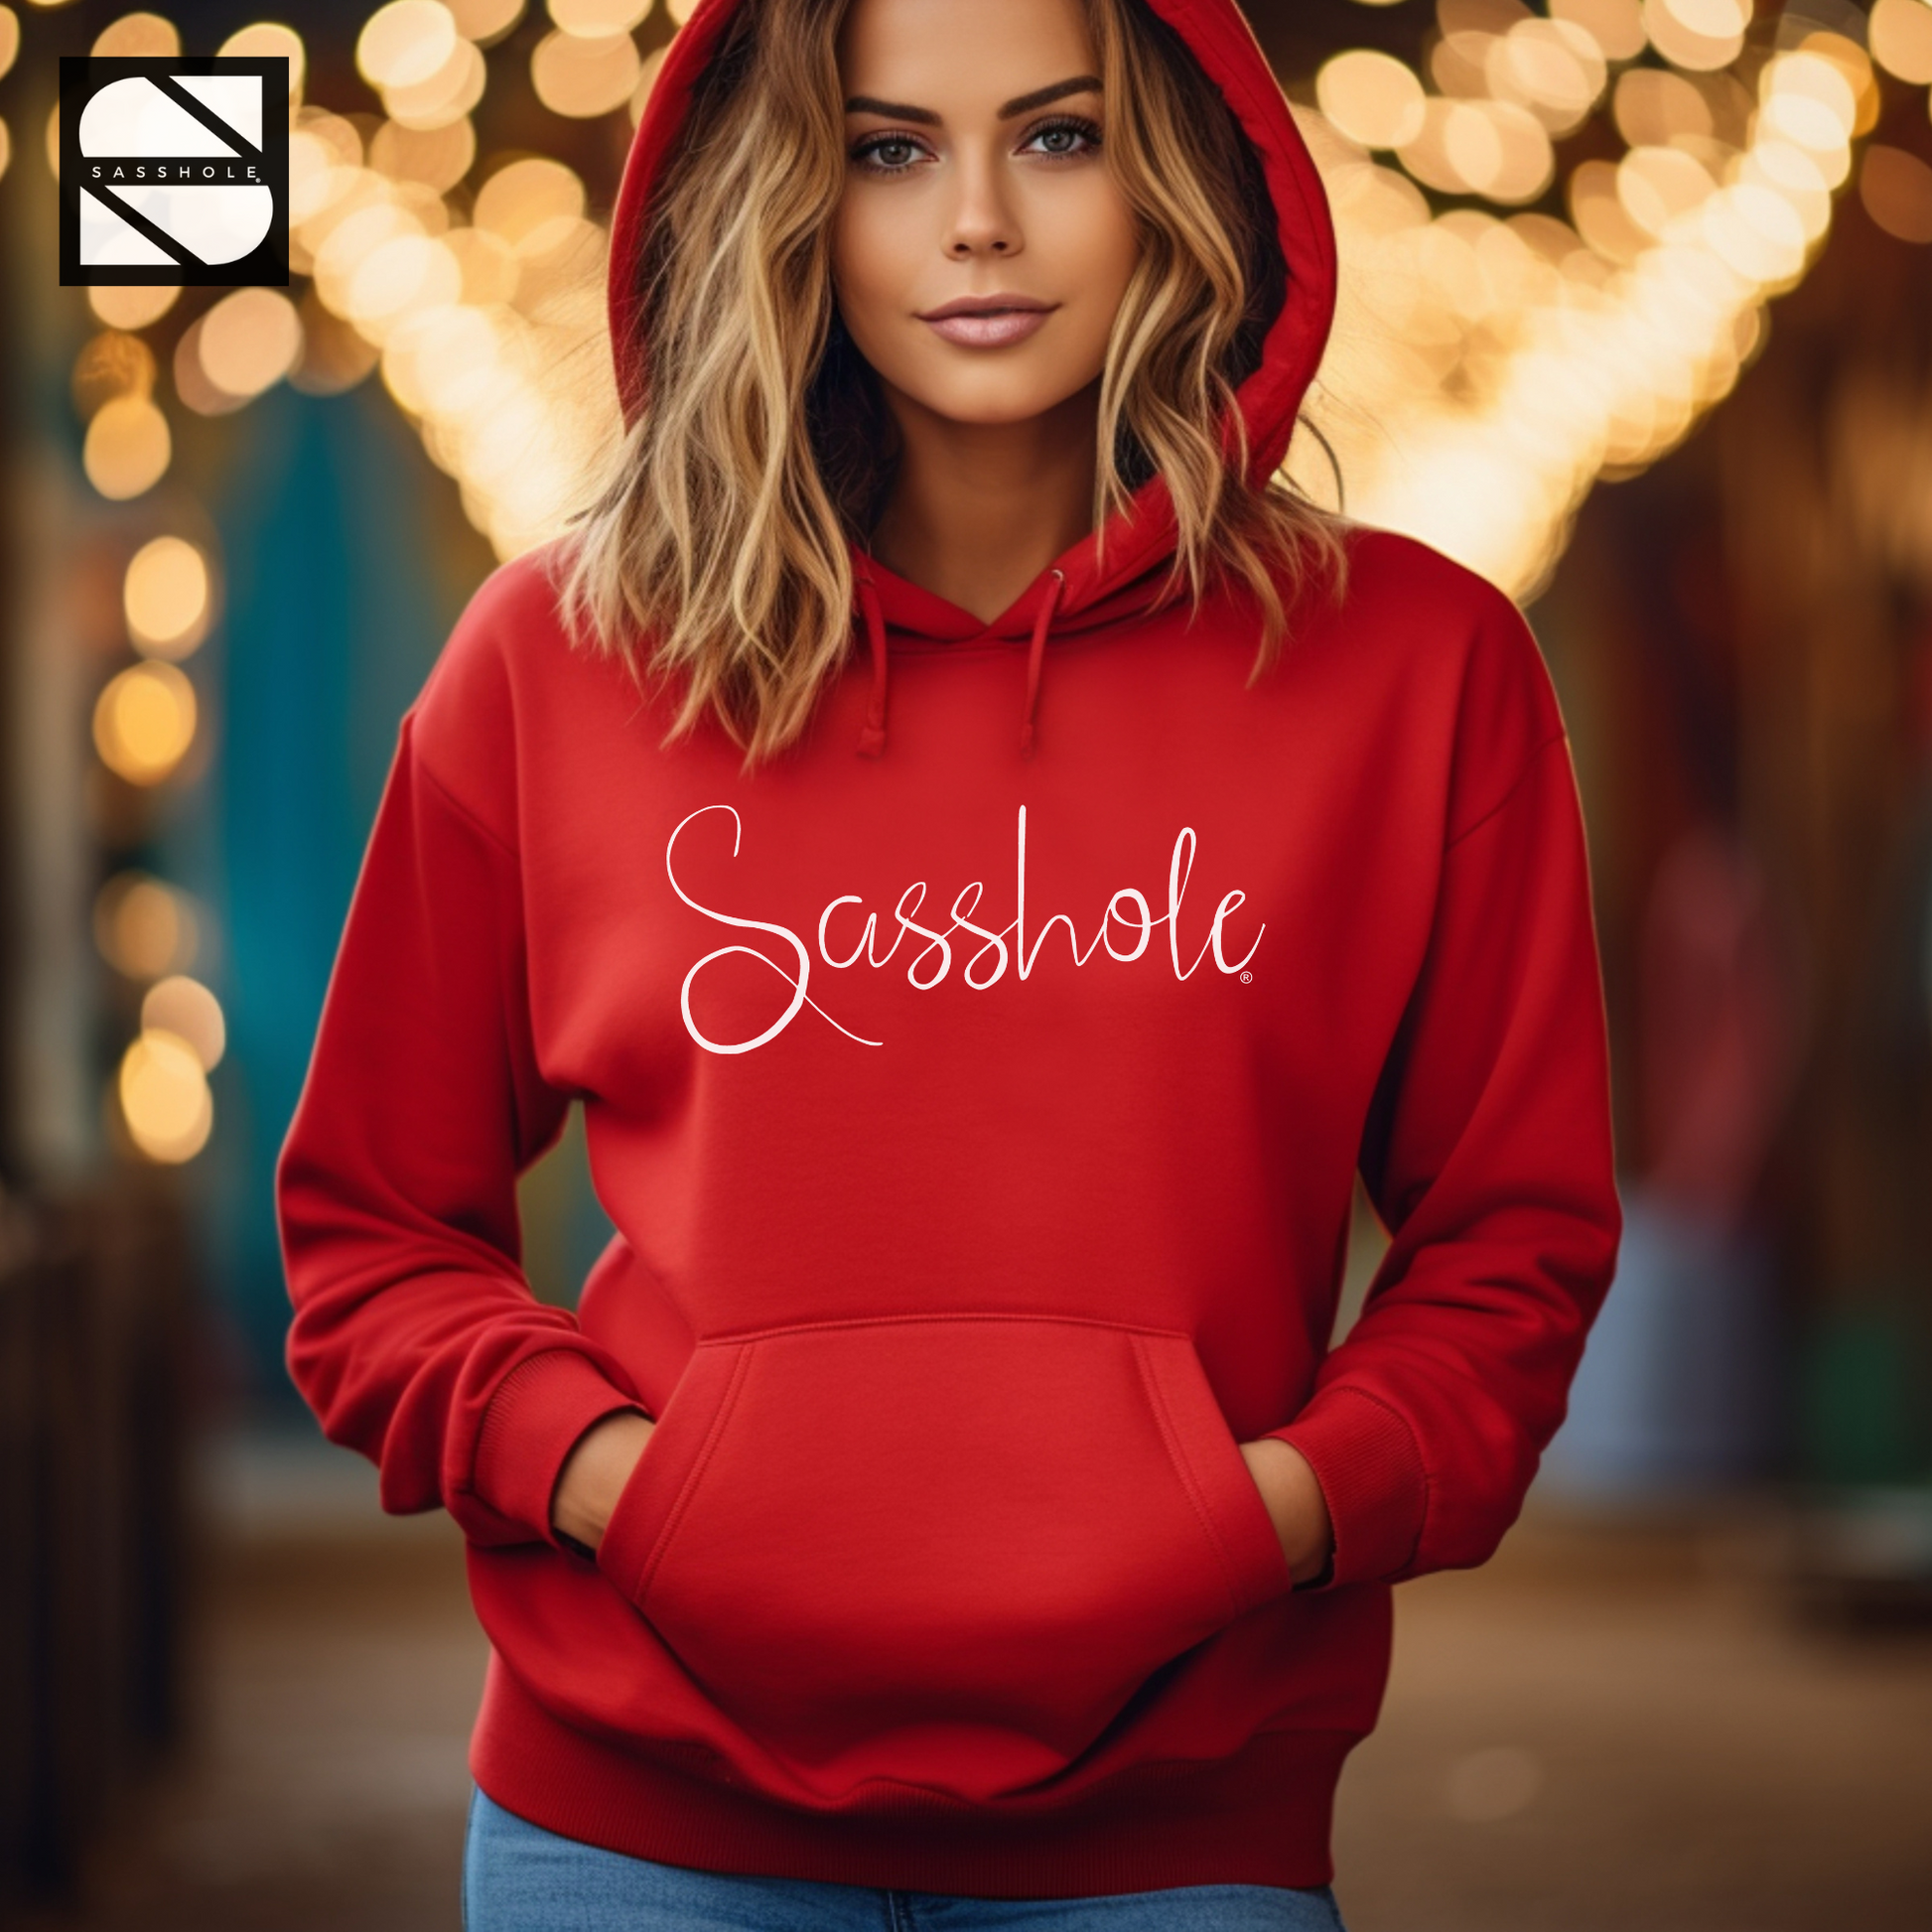 womens pullover hoodie, womens oversized pullover hoodie, womens hoodies, womens hoodie, womens graphic pullover hoodies, womens fleece pullover hoodies, womens black hoodie pullover, womens black hoodie, women's pullover hoodies, women's pullover, women's hoods, women's hooded sweatshirts, women's hooded sweatshirt, Women's Clothing, women's casual wear, women's black graphic hoodie, women hoodies, women hoodie, witty wardrobe, witty slogan hood